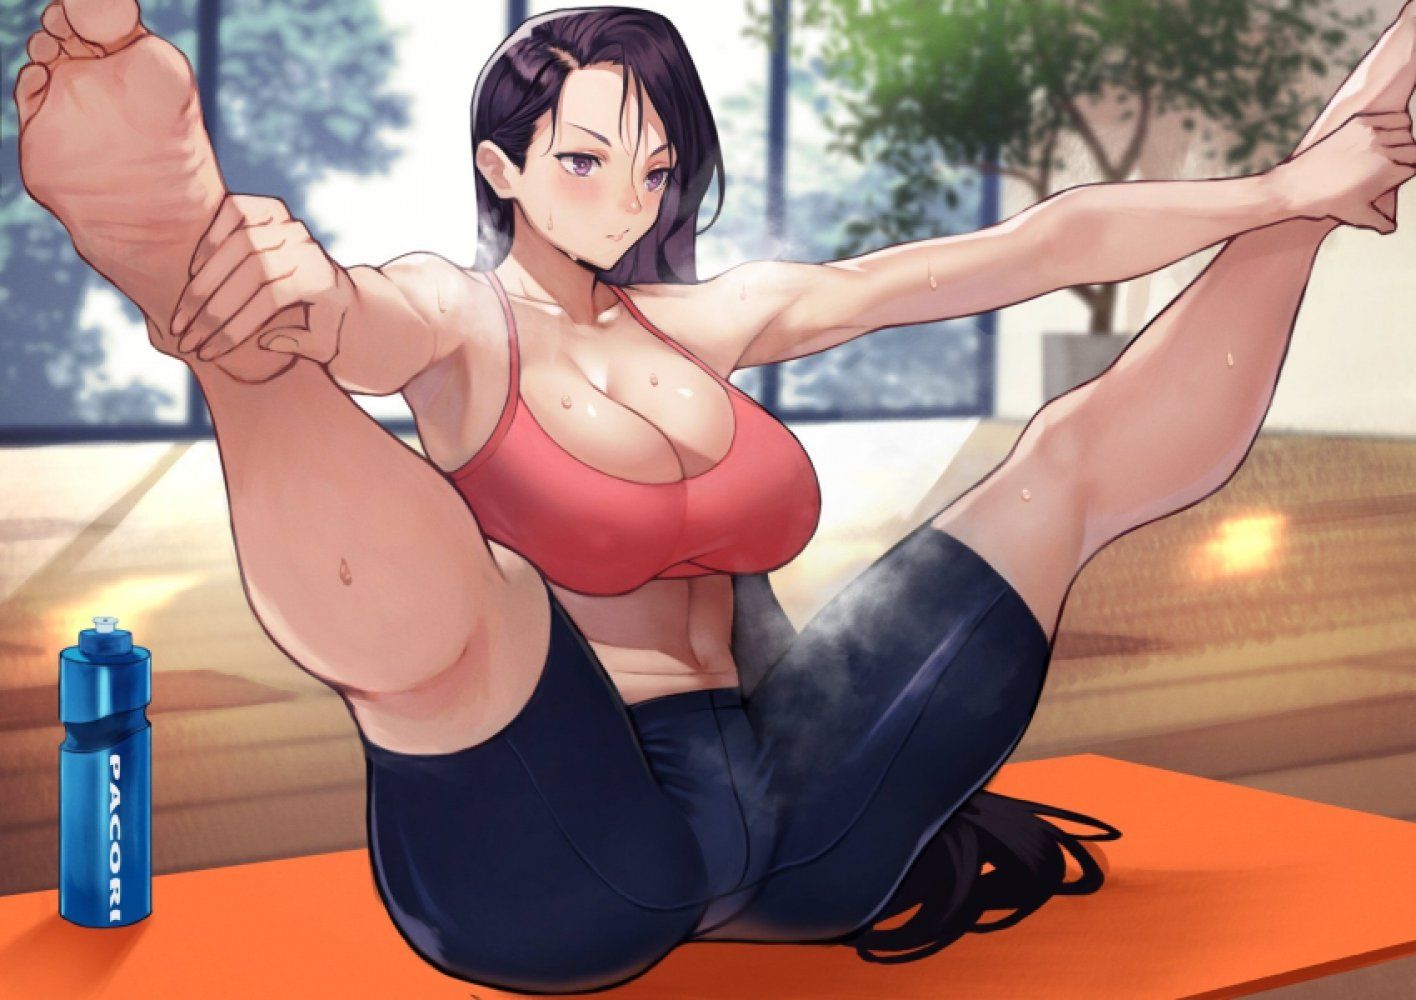 【Secondary】Image of a girl wearing a spats [erotic] 27